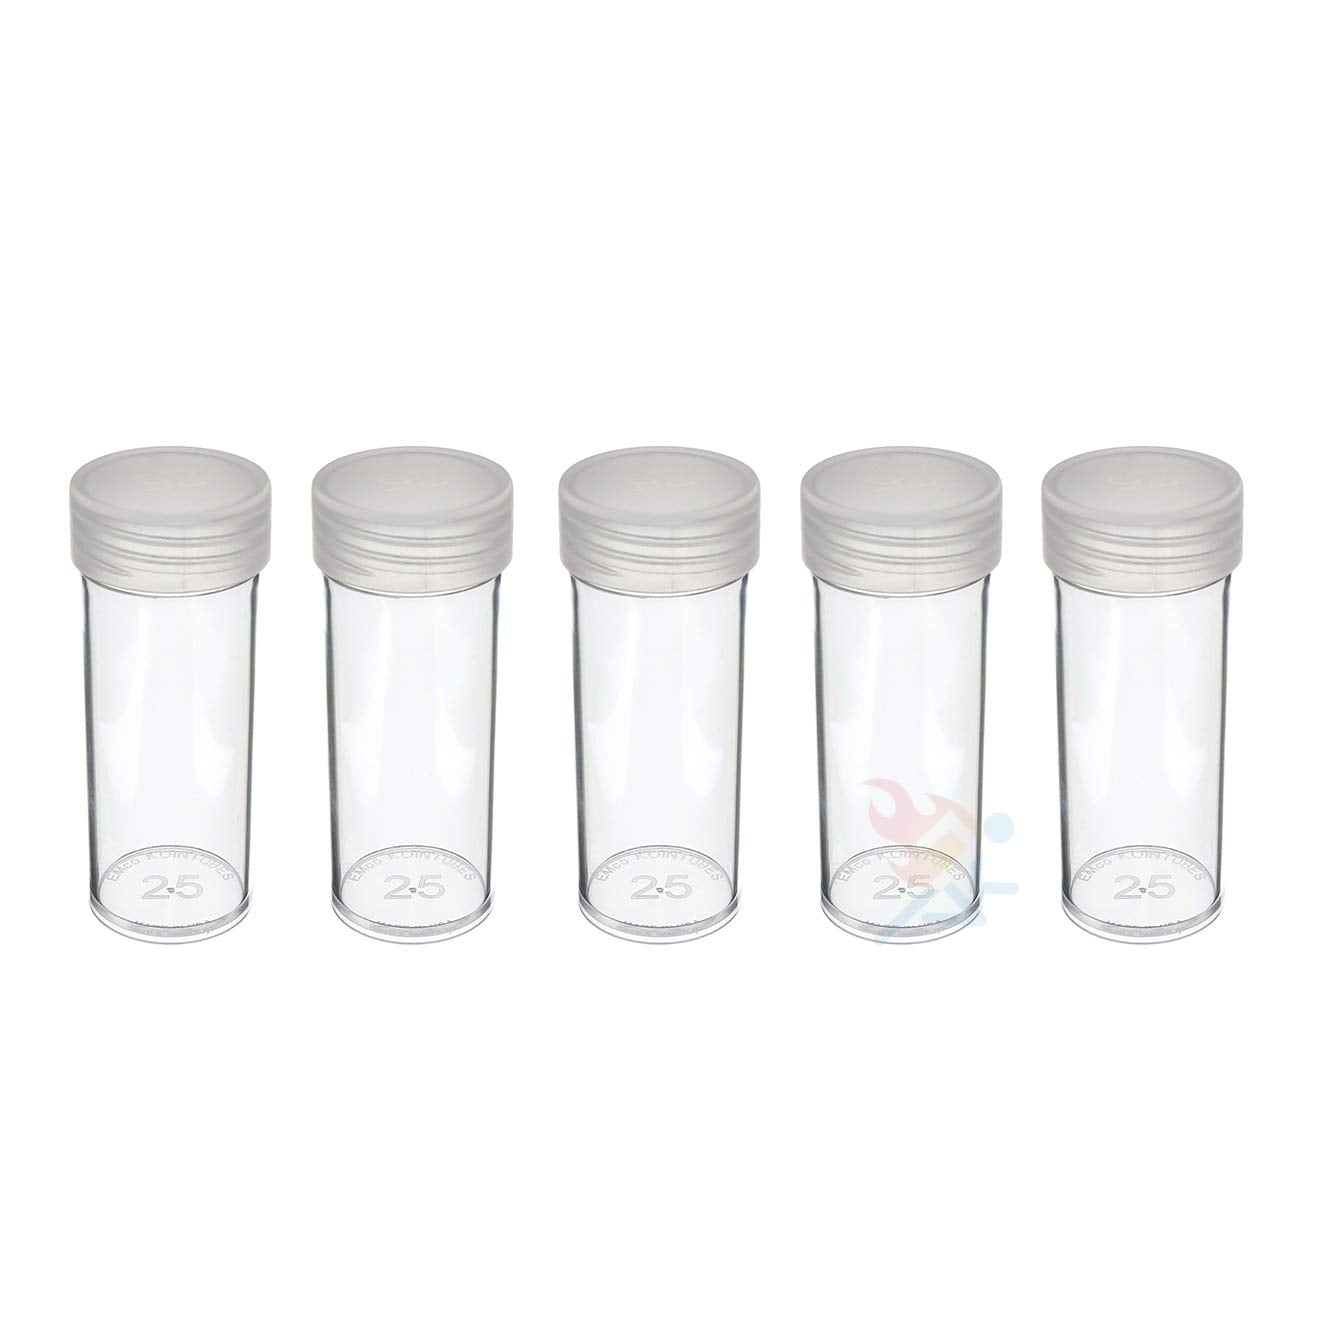 10 Coin Safe Clear Archival Plastic Coin Tubes US Quarter Size Best Storage Tube 